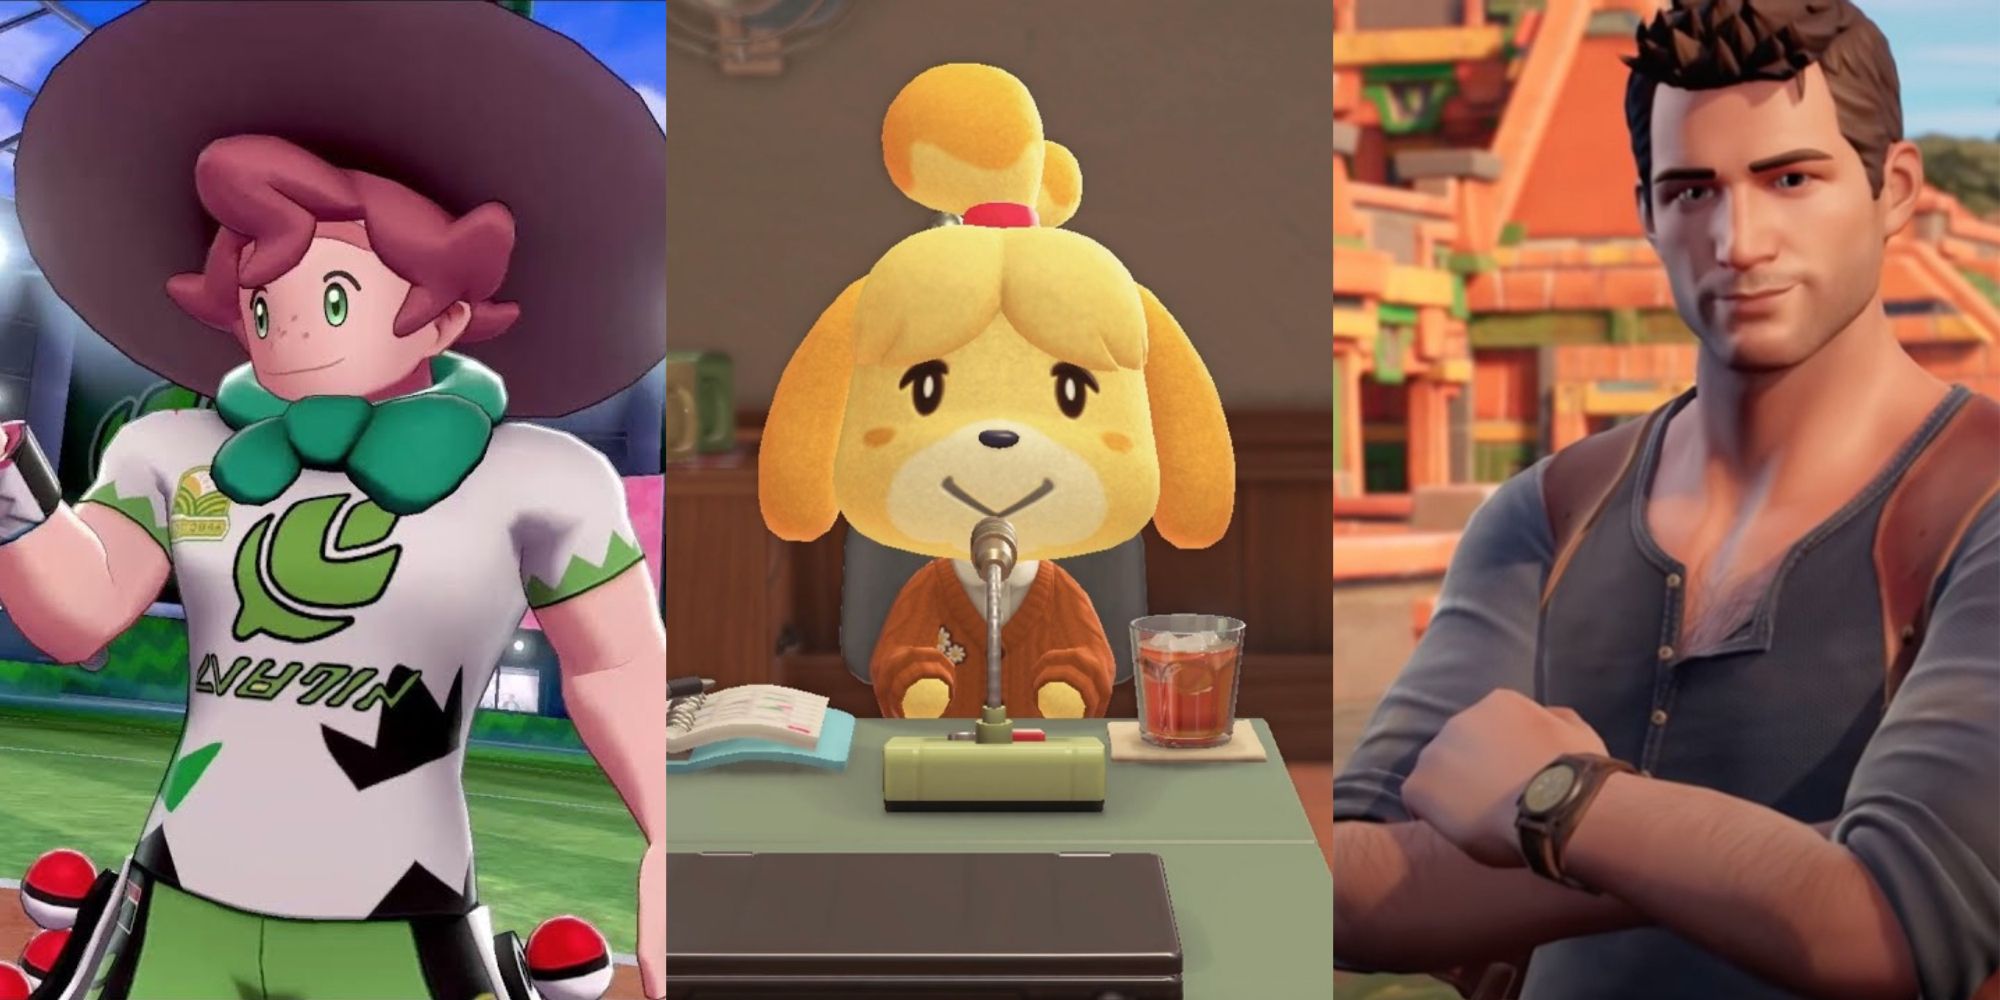 Pokemon Sword & Shield Milo in his Gym, Animal Crossing Isabelle at her desk in a sweater, Uncharted Nathan Drake in front of a temple in Fortnite